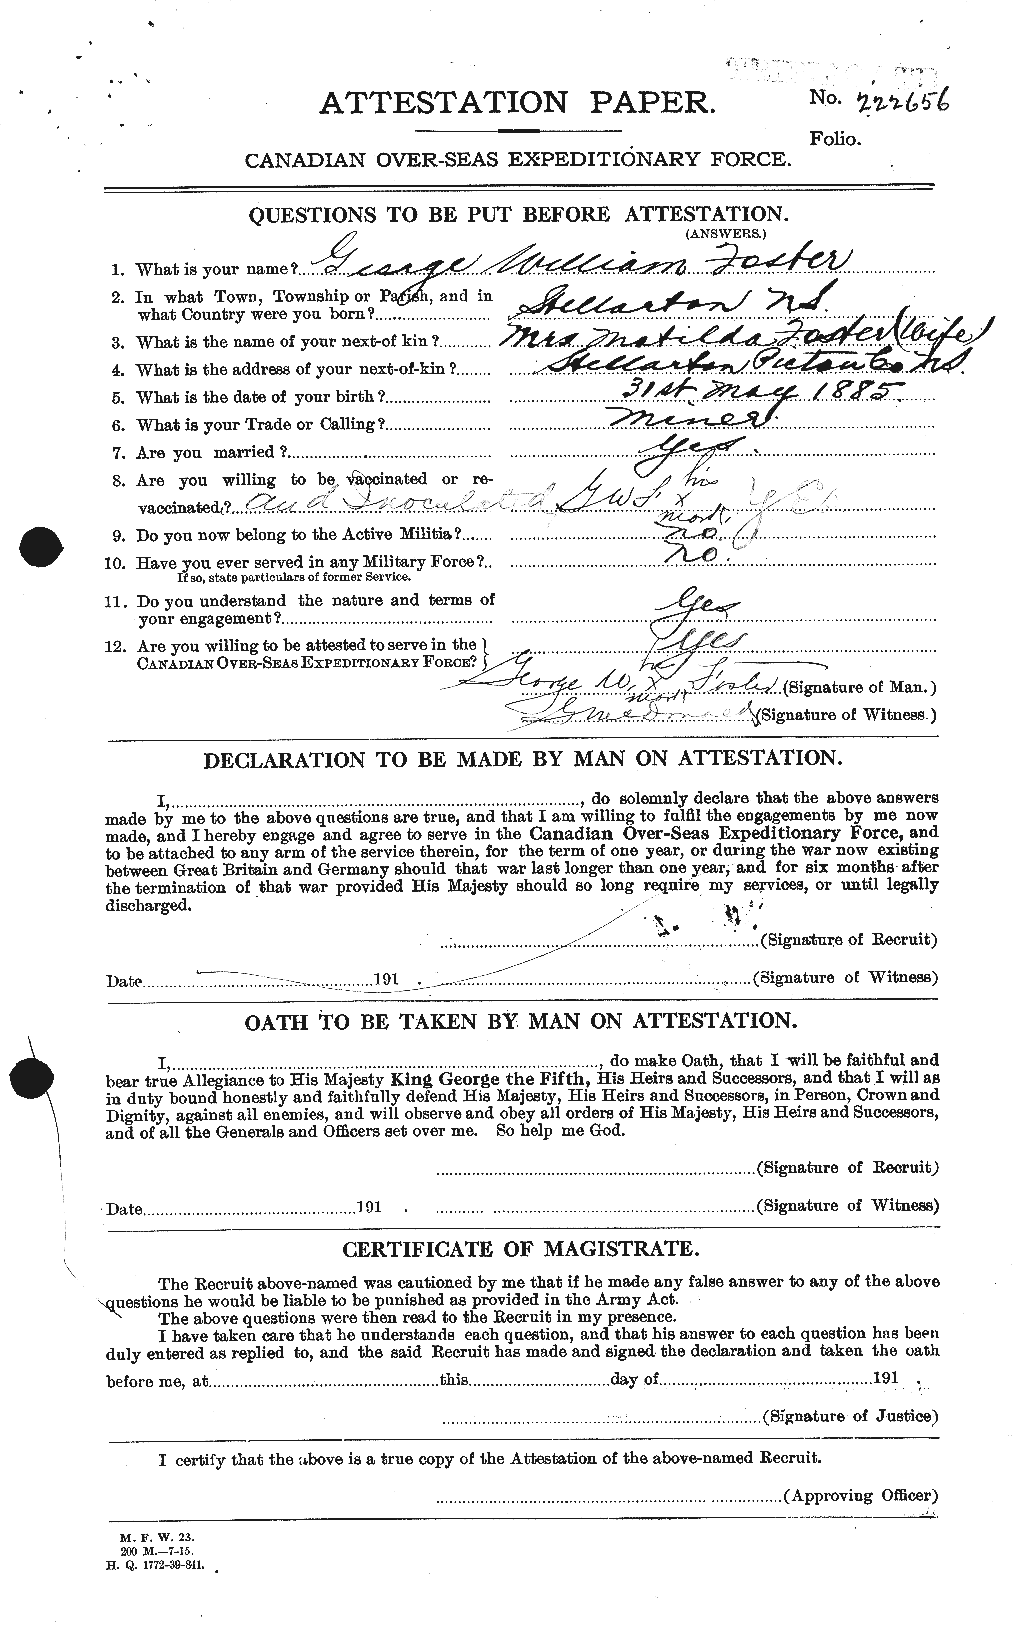 Personnel Records of the First World War - CEF 330706a